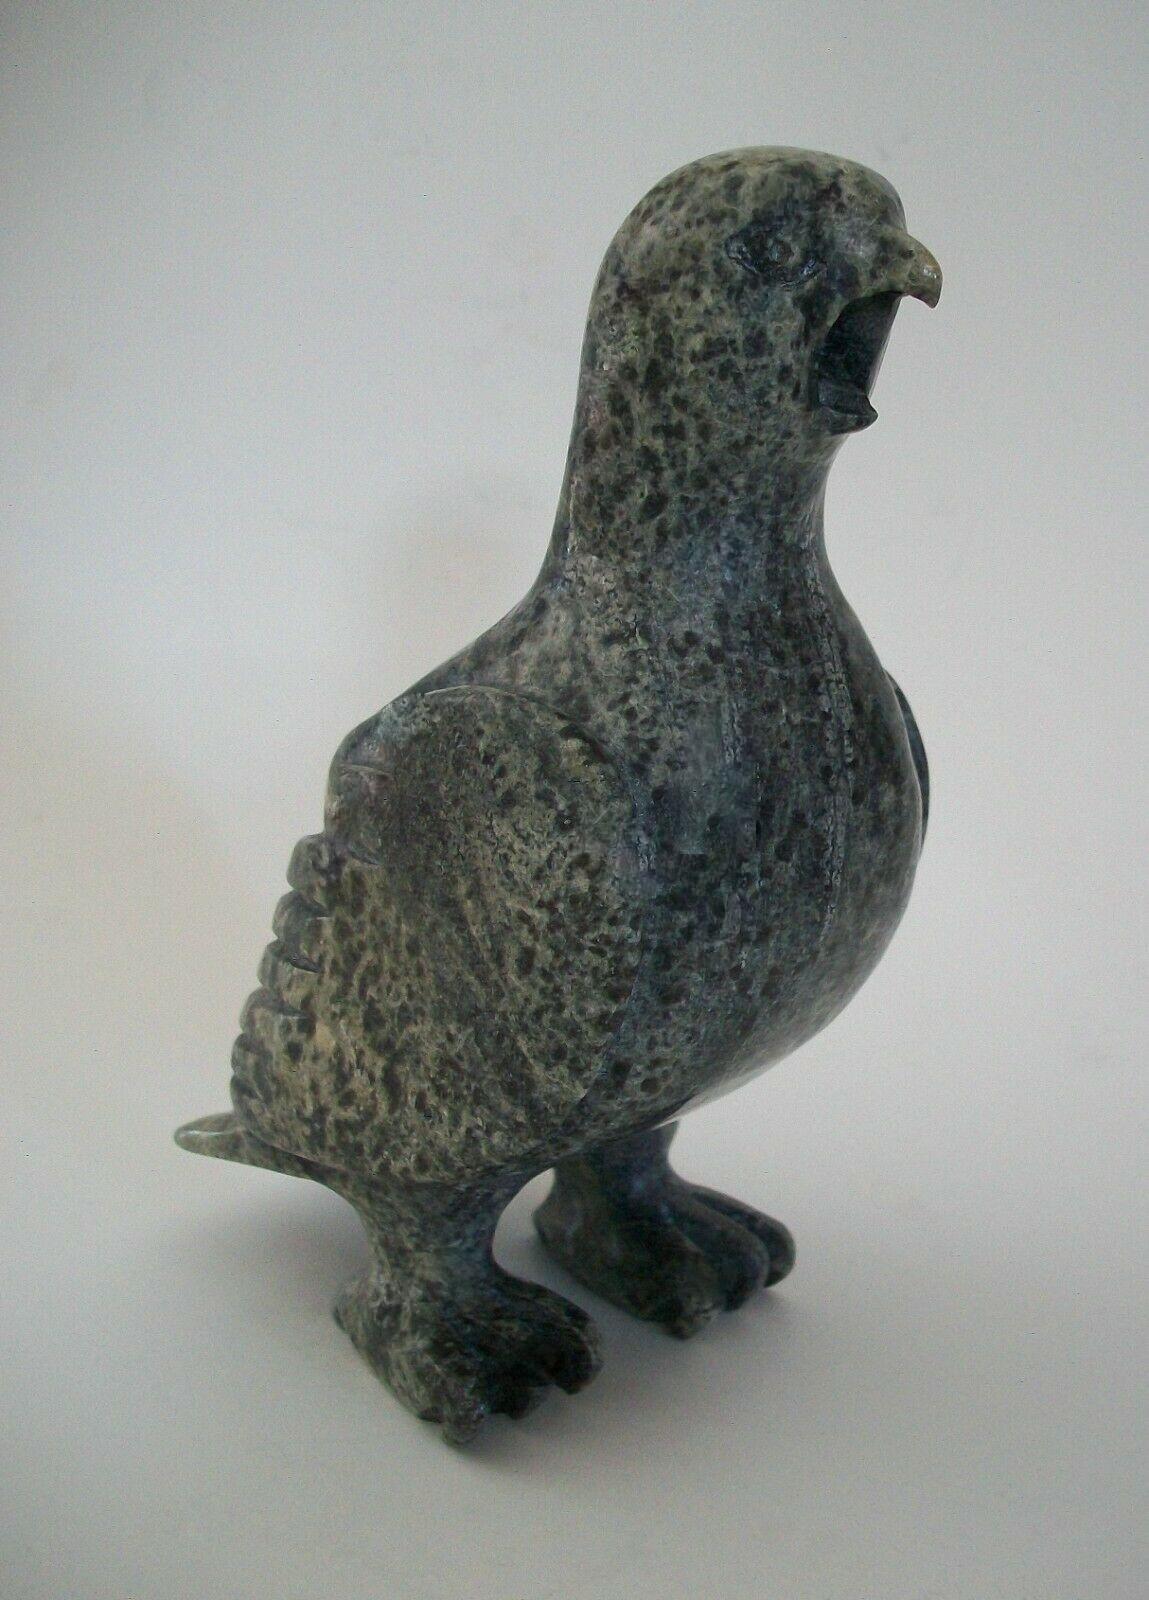 Vintage Cape Dorset Inuit stone carving of a screeching Ptarmigan - fine carving with articulated feathers and feet - signed TR (in Roman - unknown / unidentified artist) on the base - Canada - circa 1960's.

Excellent vintage condition - minor